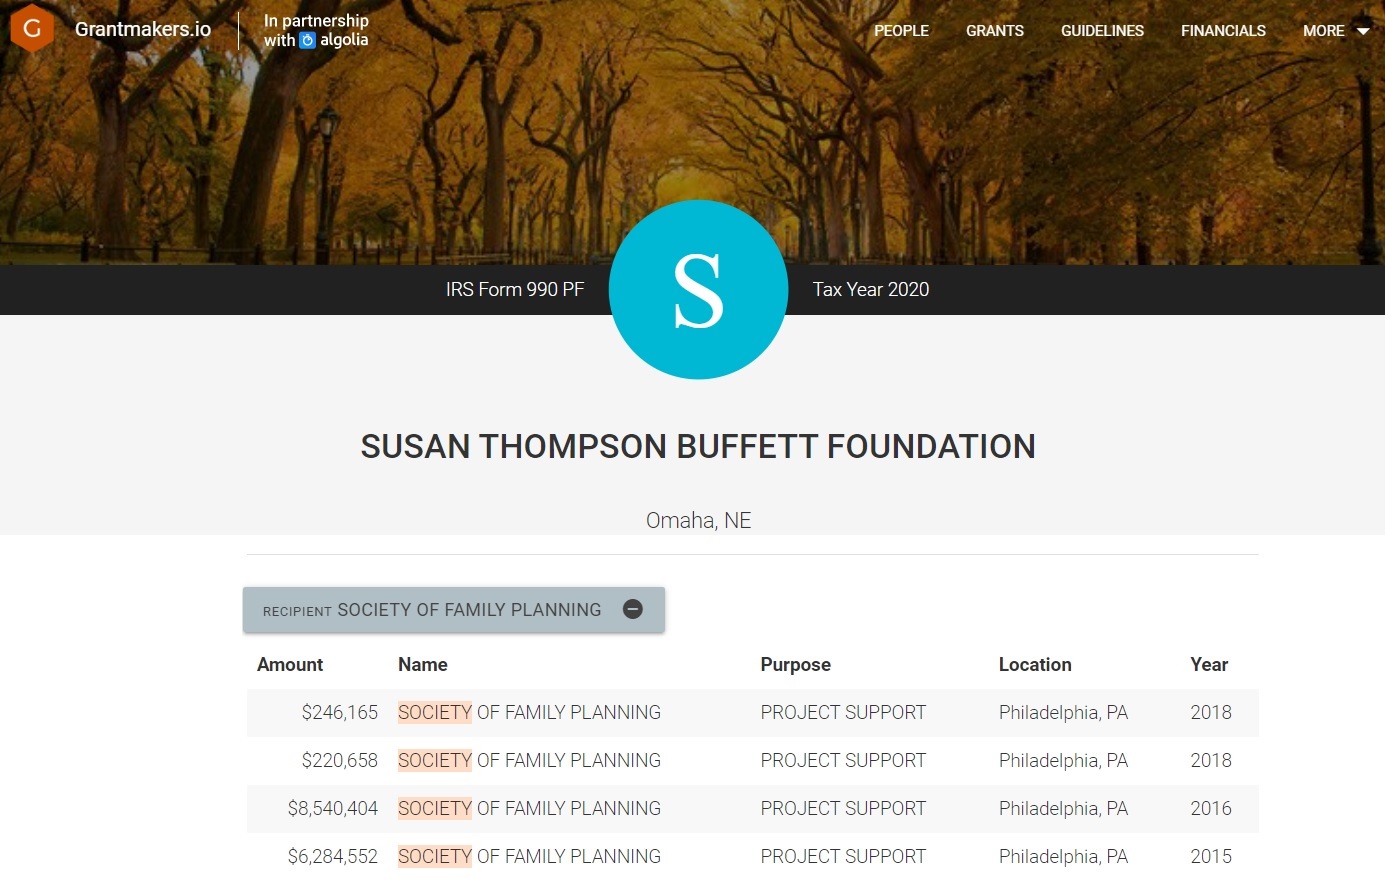 Image: Society of Family Planning (SFP) funded by Danco investor Buffett Foundation per Grantmakers